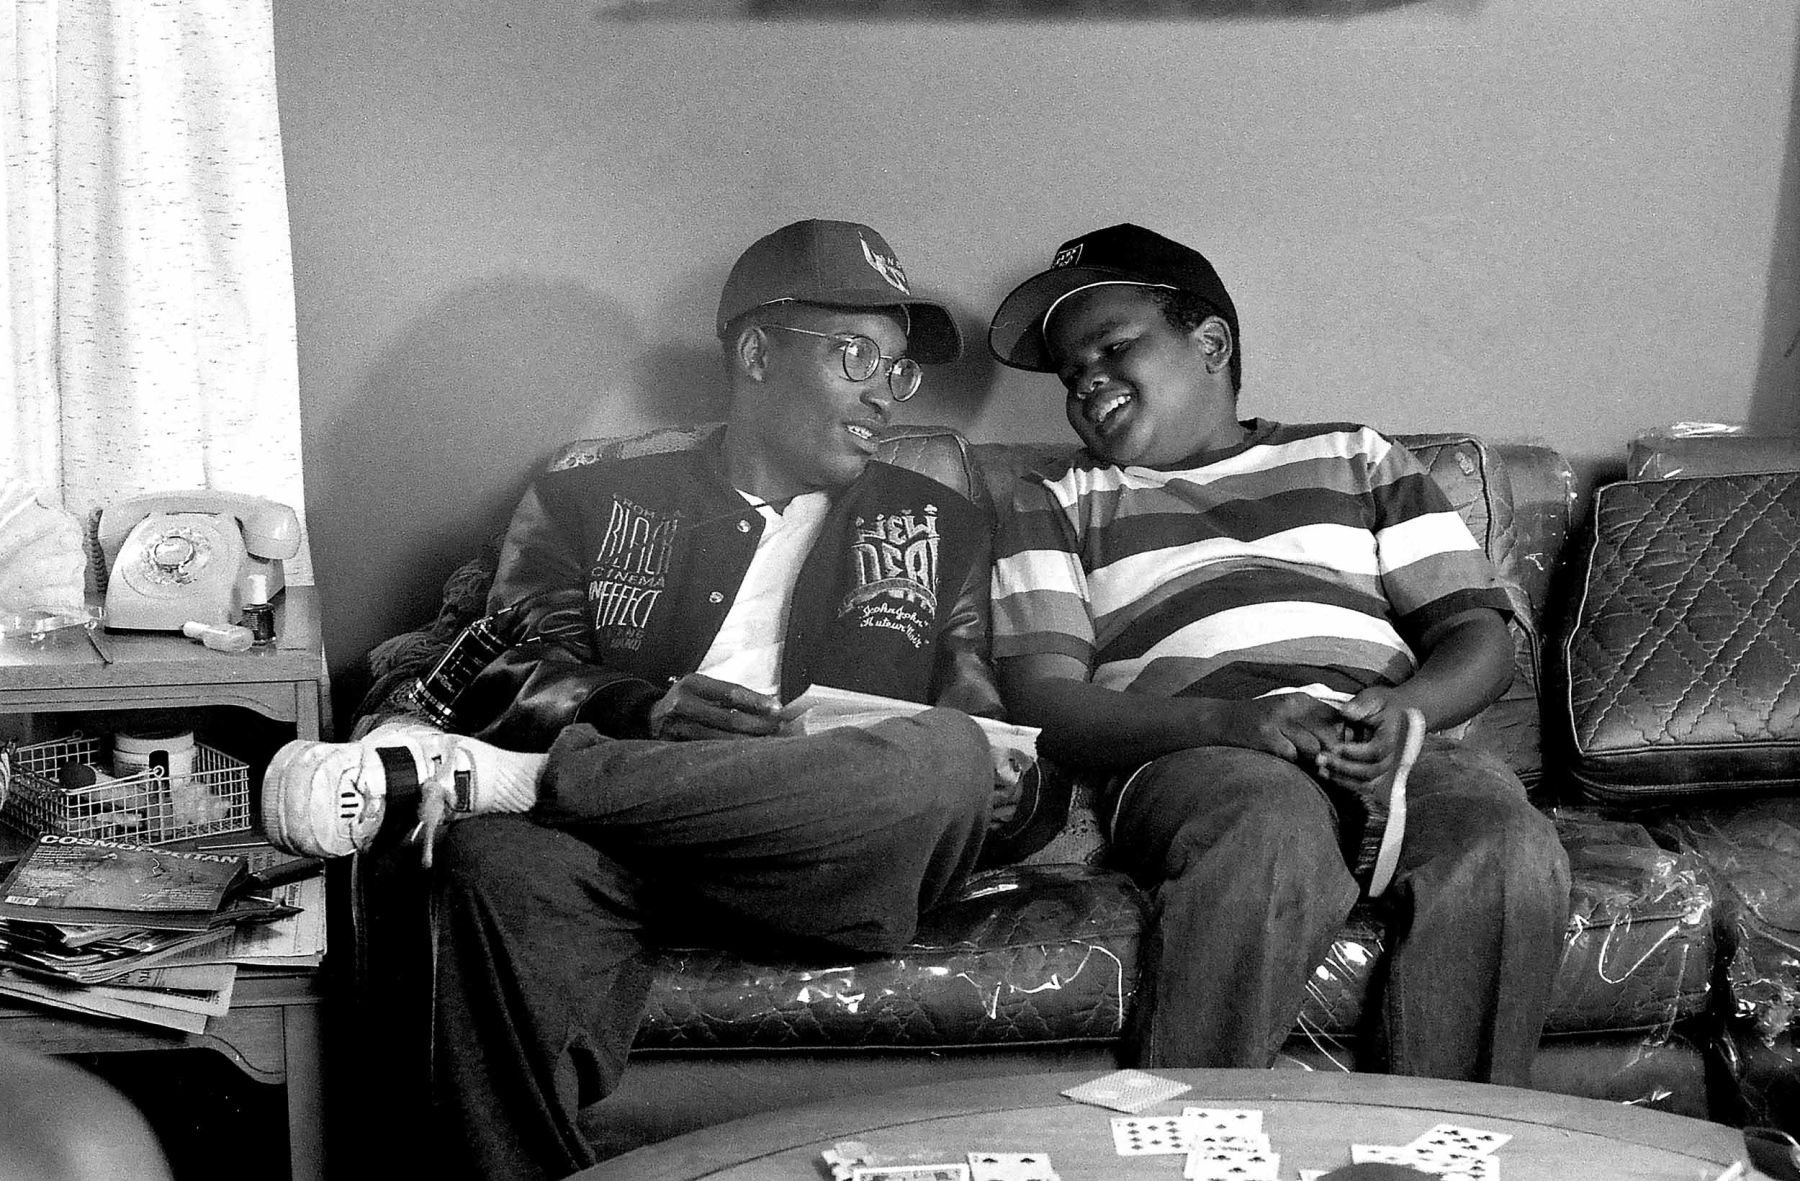 John Singleton on set with “young Doughboy” (Baha Jackson). Sony Pictures.

